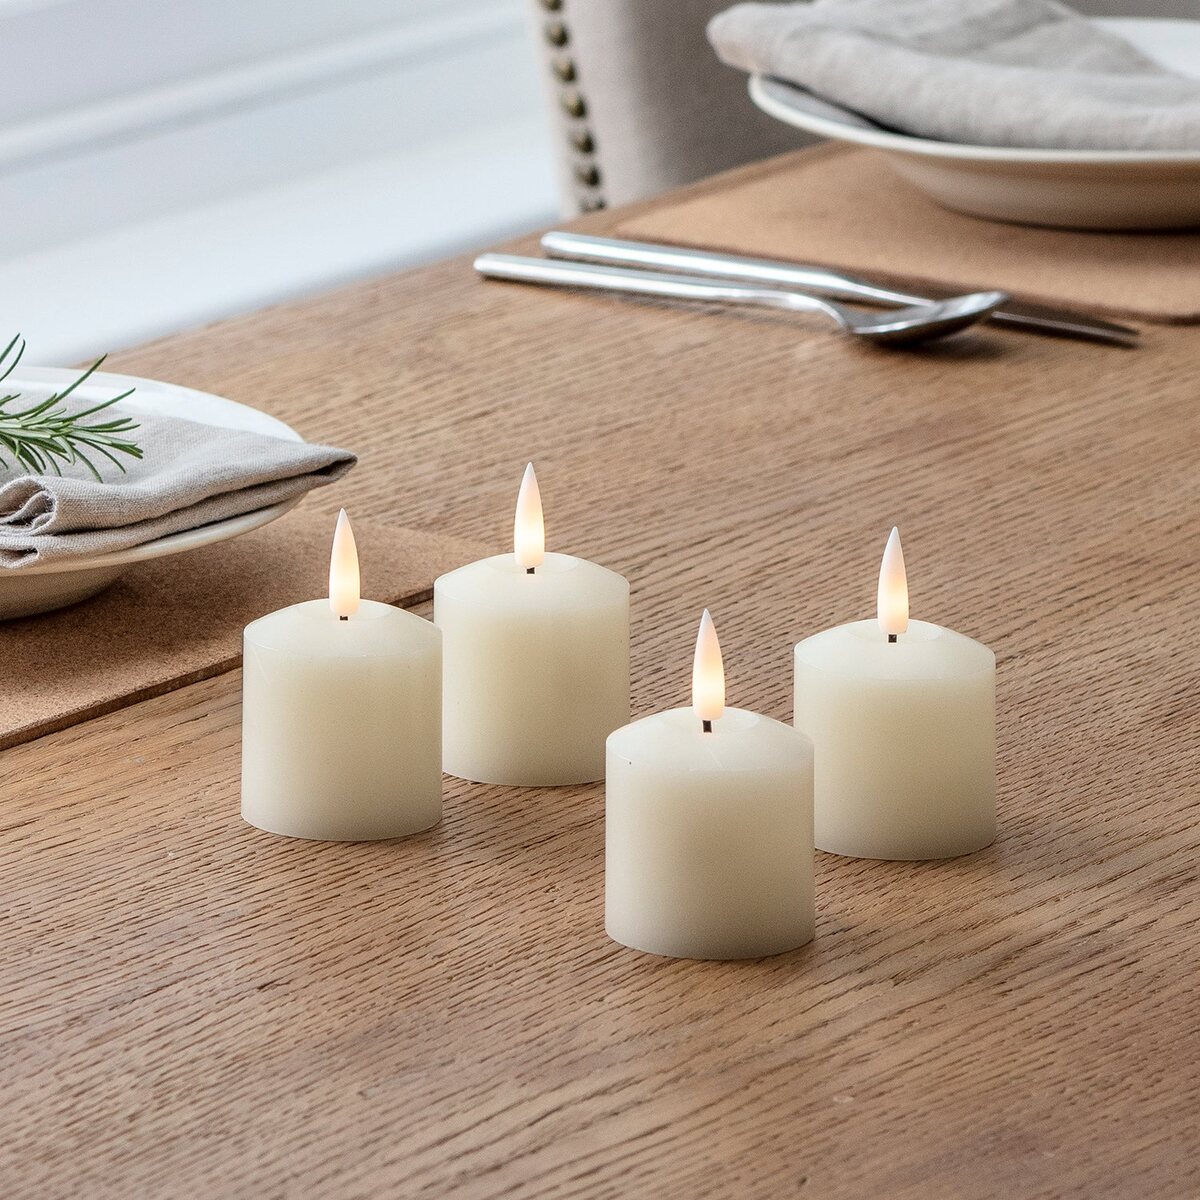 Why Are Votive Candles Used?